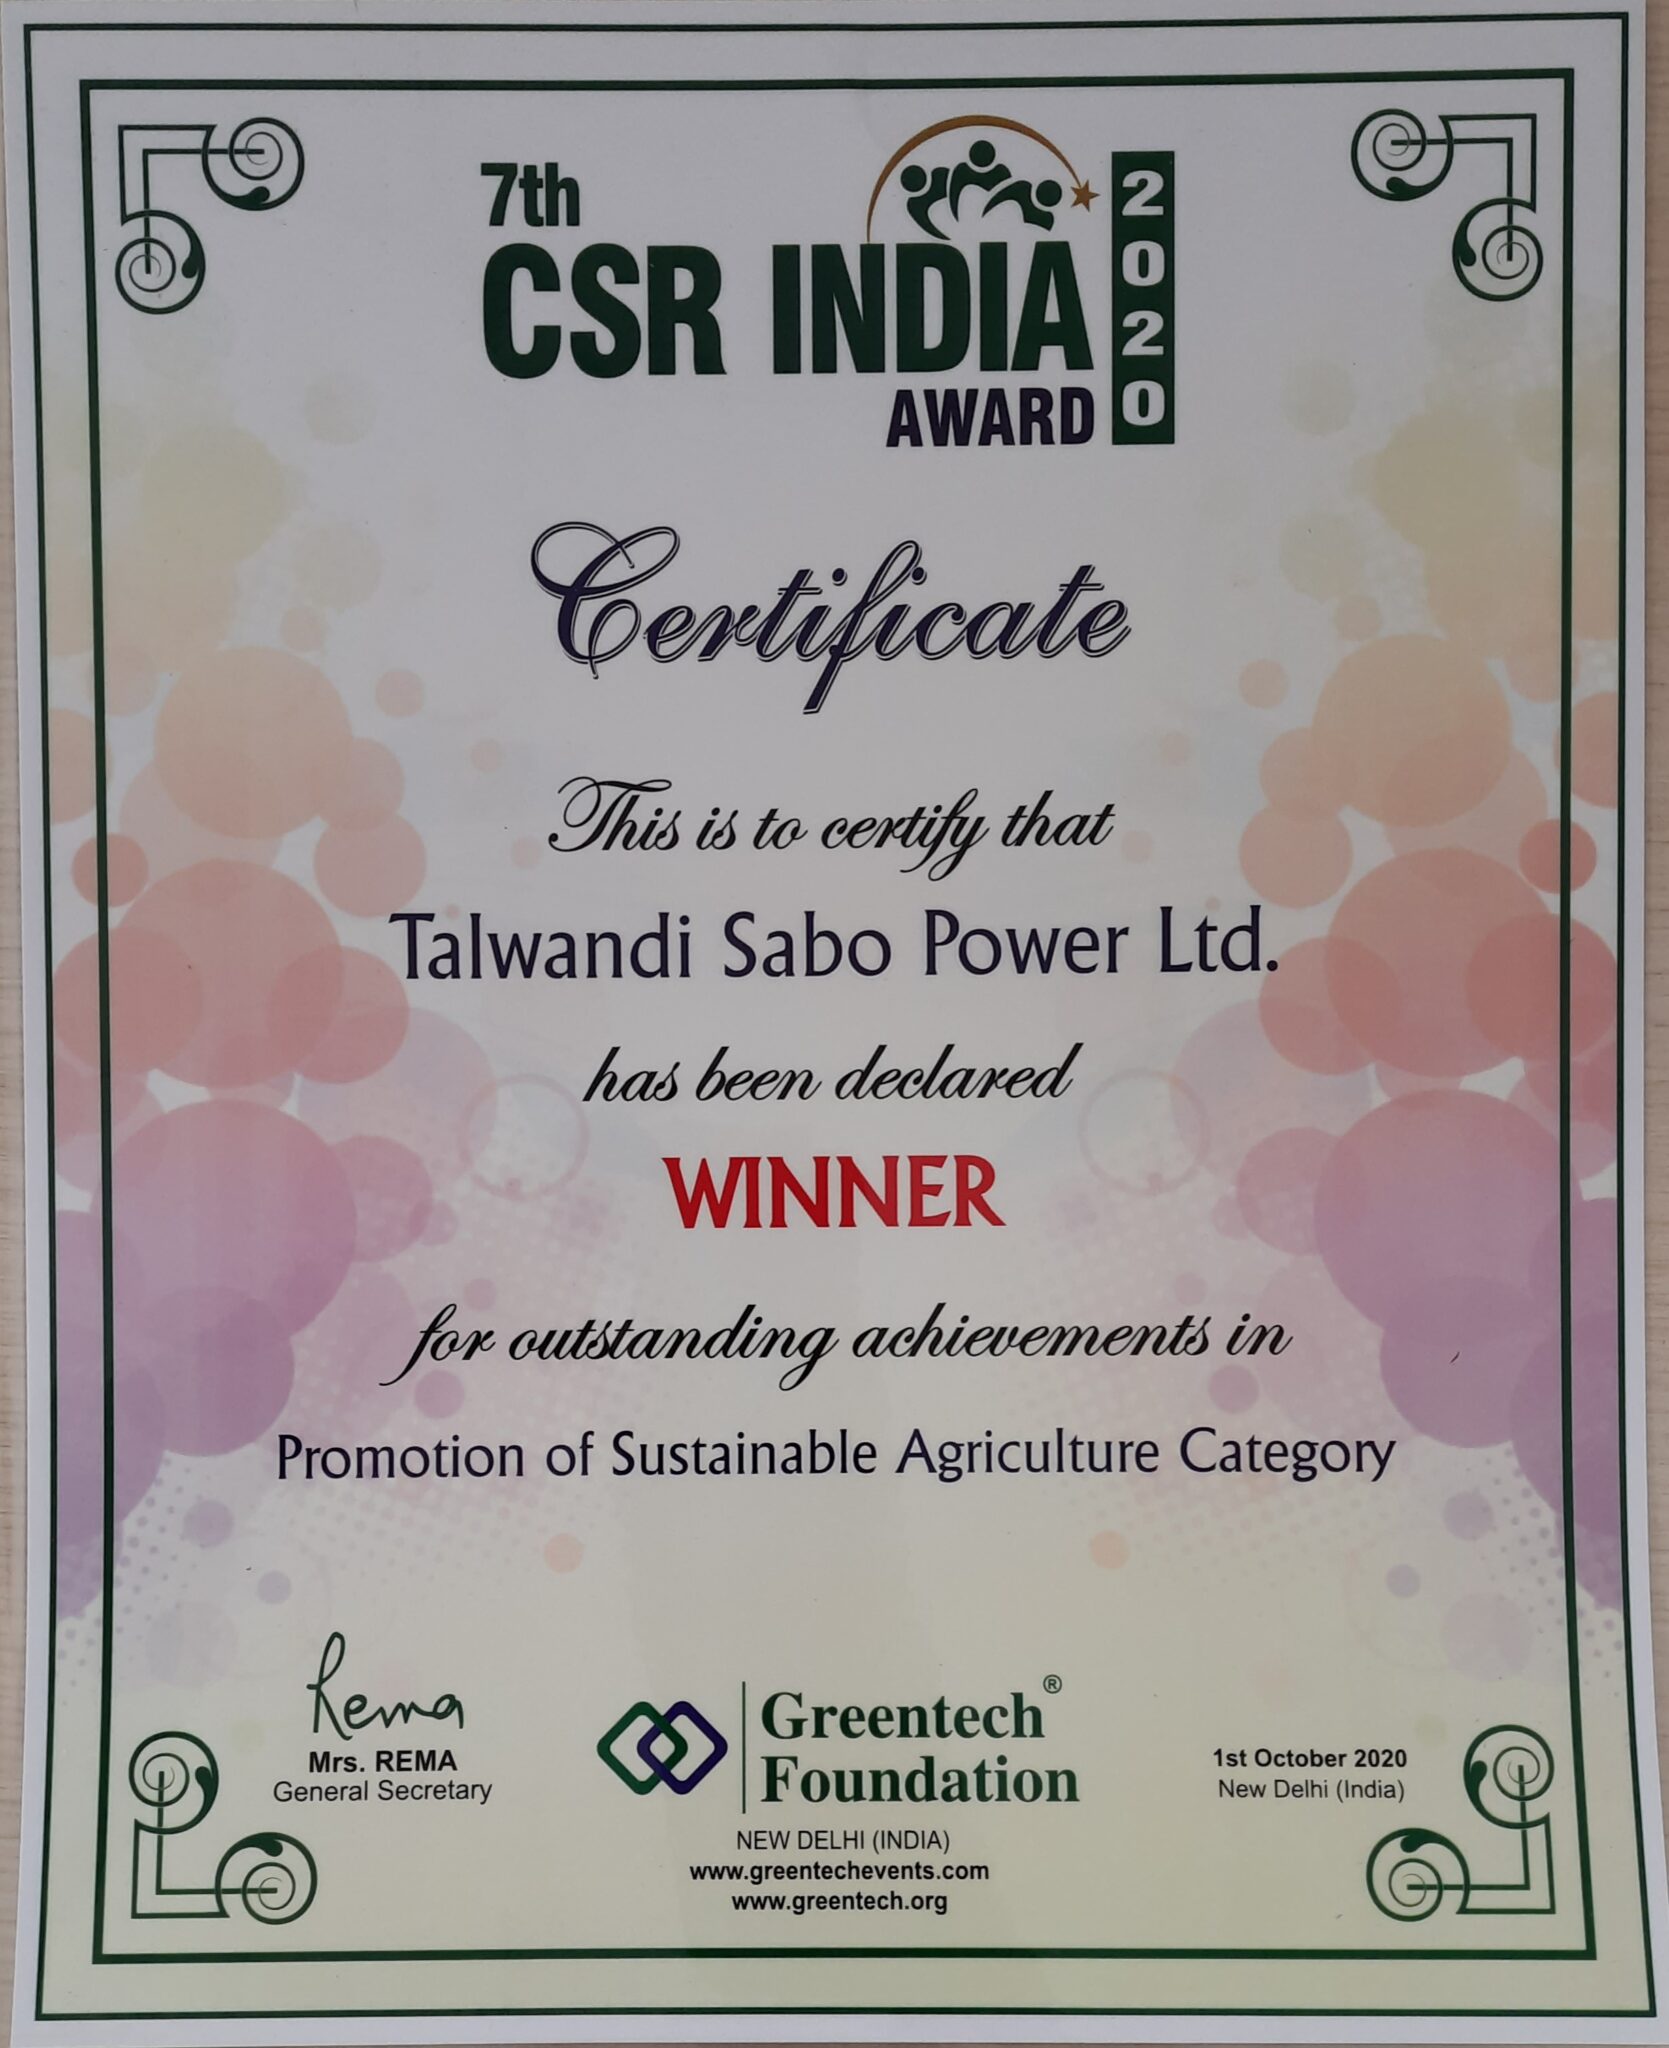 TSPL wins award for promoting sustainable agricultural practices in rural Punjab